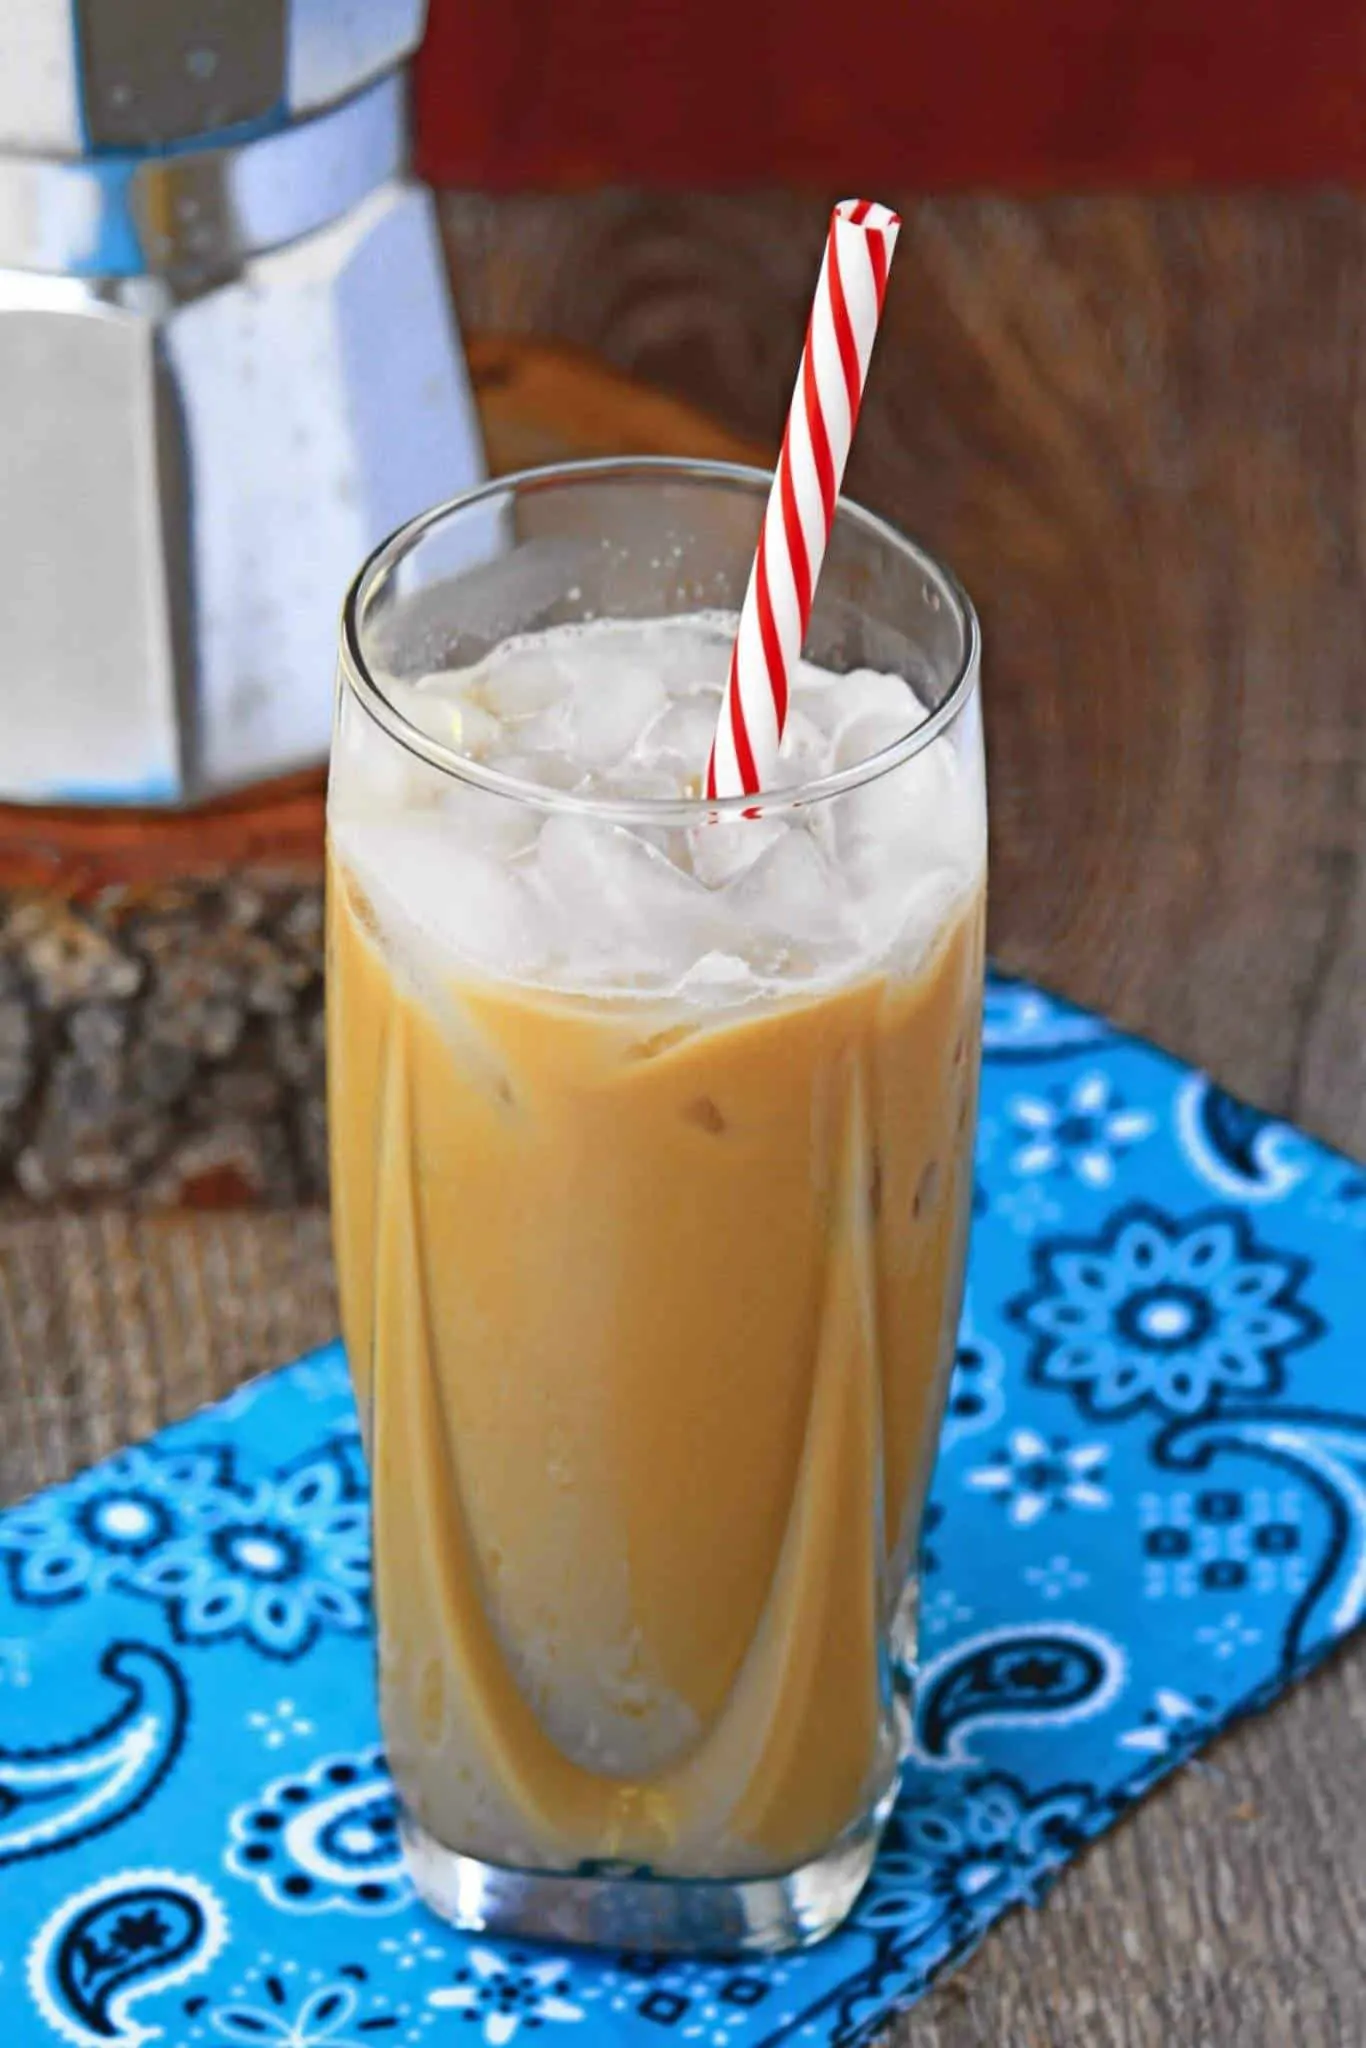 Vietnamese iced coffee with red and white straw.